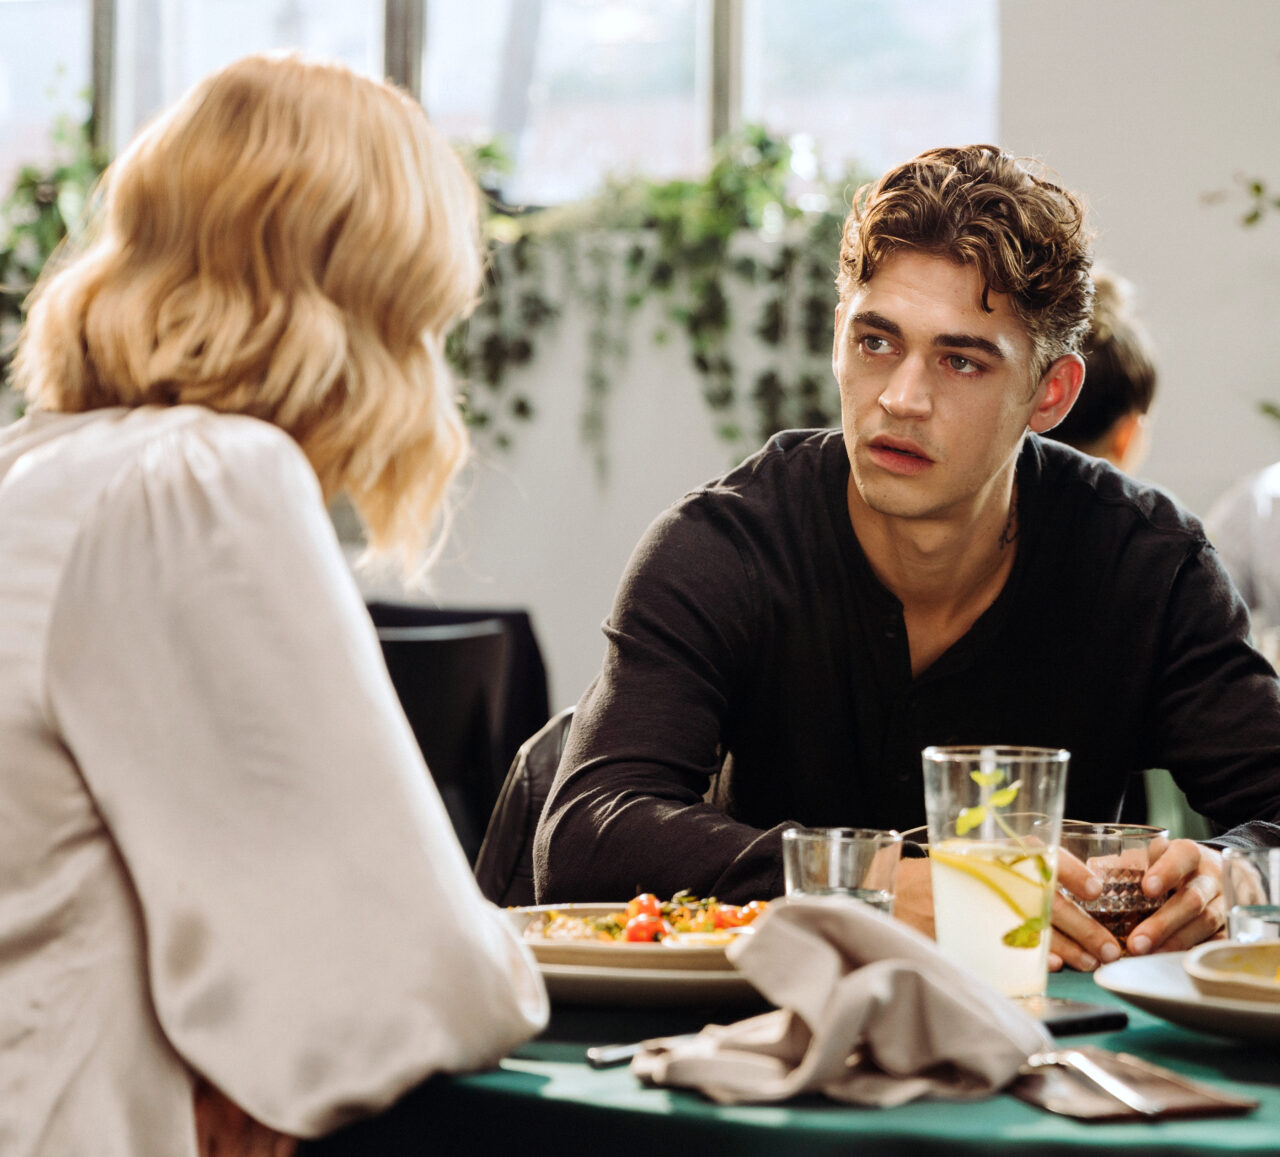 Hero Fiennes Tiffin as Hardin, Louise Lombard as Trish in After Everything, the fifth and final installment in the After franchise.